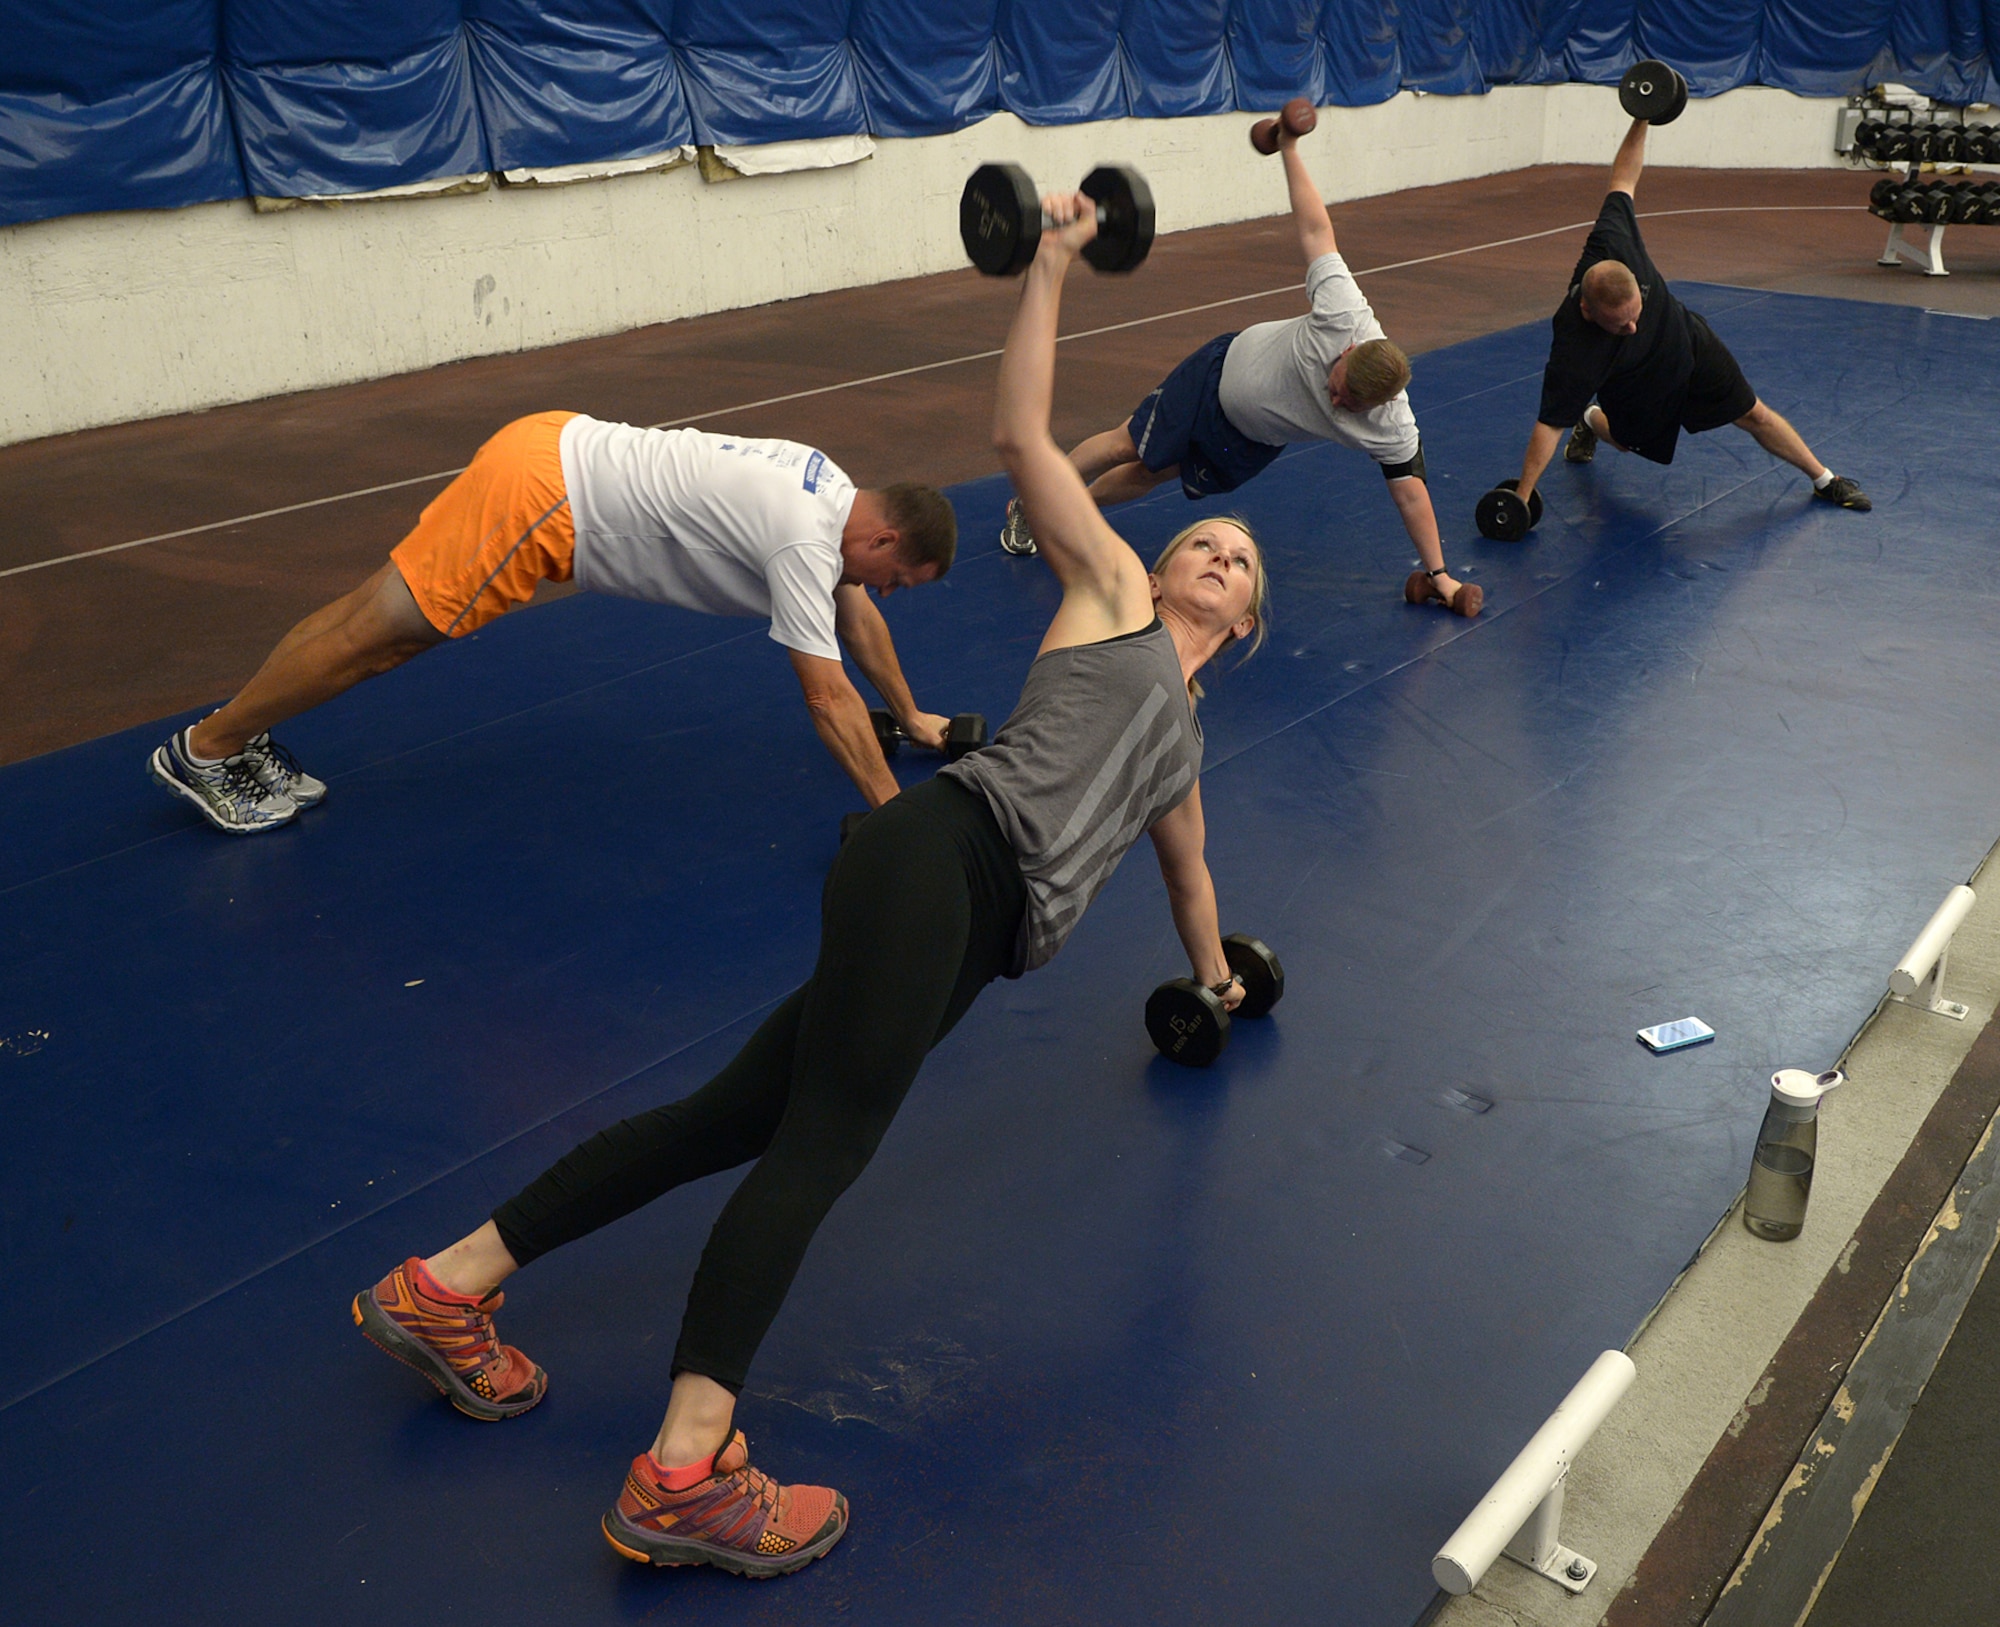 Tech. Sgt. Kristina Decot, noncommissioned officer in charge of Chapel Operations (far right), leads Hill Air Force Base Chaplains Maj. Scott Baker (center), Maj. Erik Harp and Capt. Jeremy Caskey (top) in a fitness routine June 30 to meet the physical pillar of Comprehensive Airman Fitness. CAF is a lifestyle and culture that focuses on mental and physical wellness, social activities, family, peer and mentor support and spiritual health. (Alex R. Lloyd/U.S. Air Force)